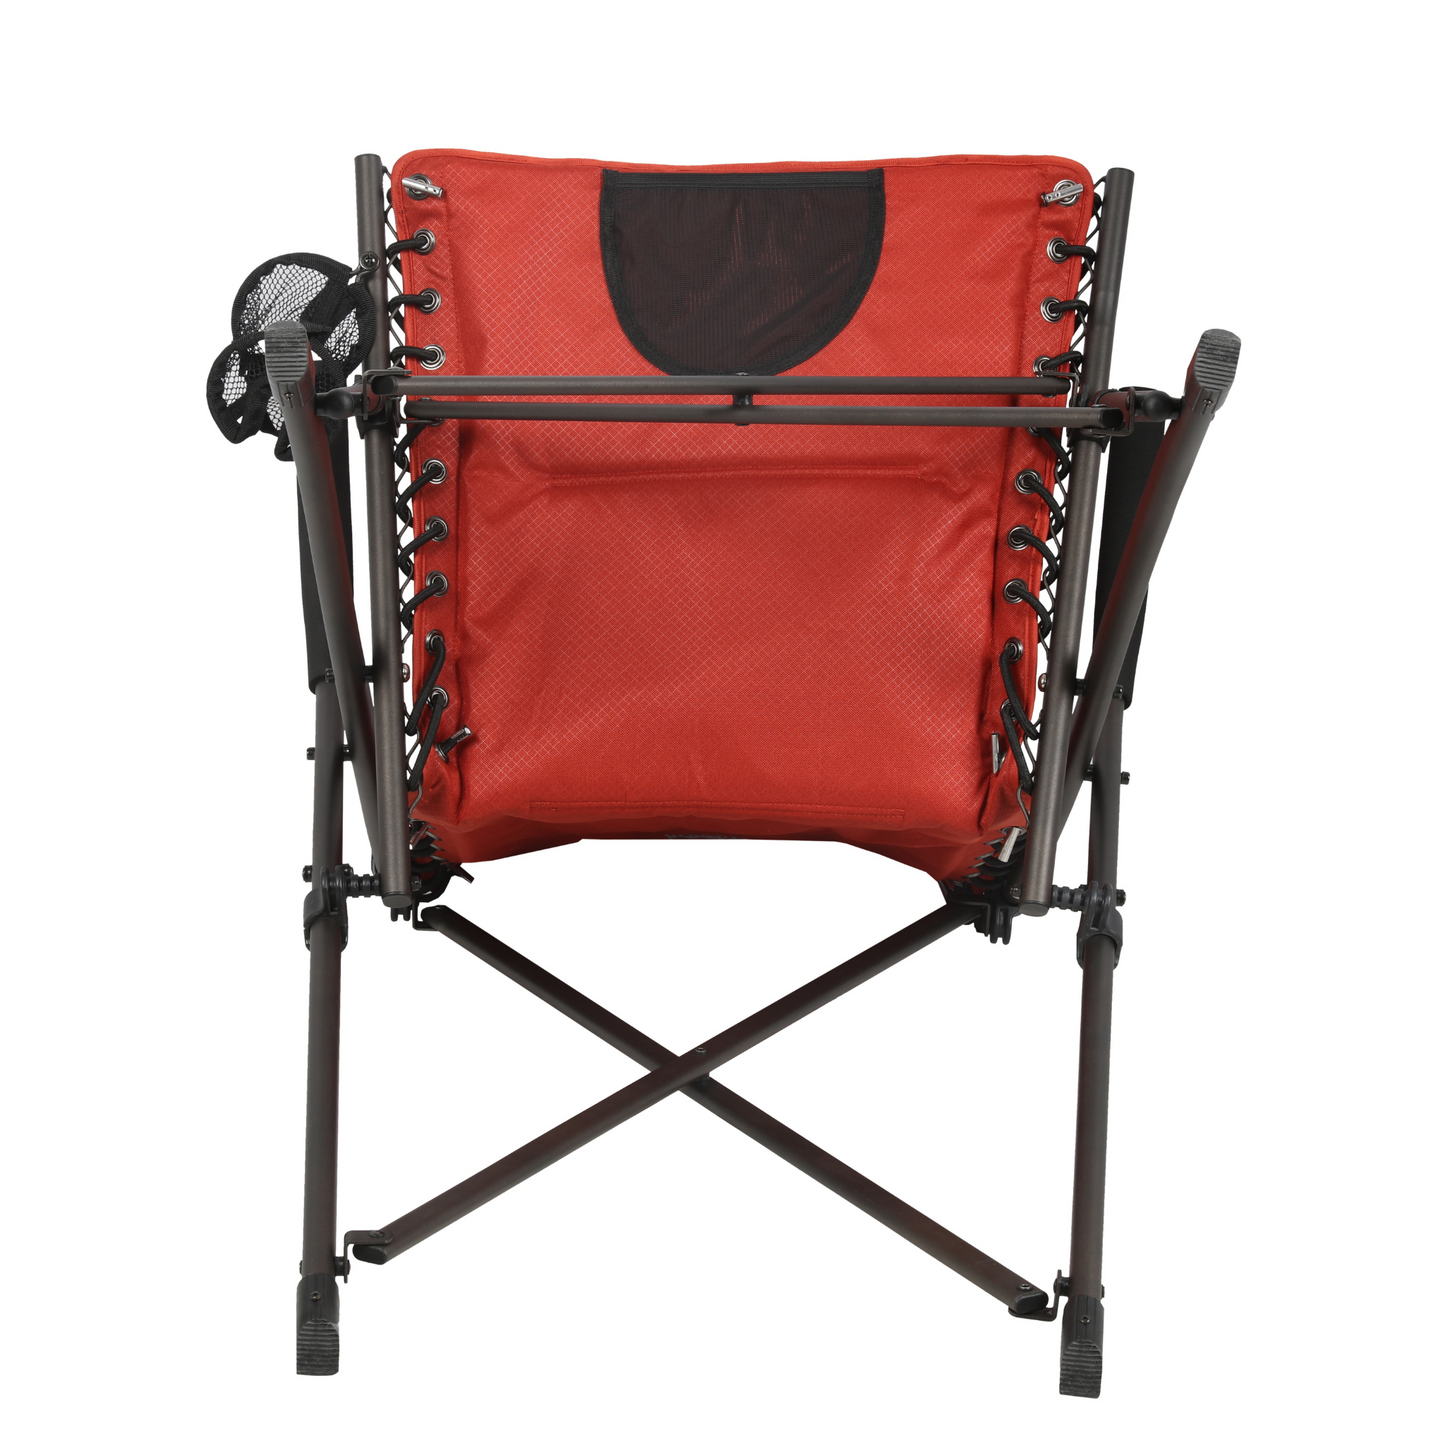 Timber Ridge® Fraser Deluxe Bungee Chair, Red